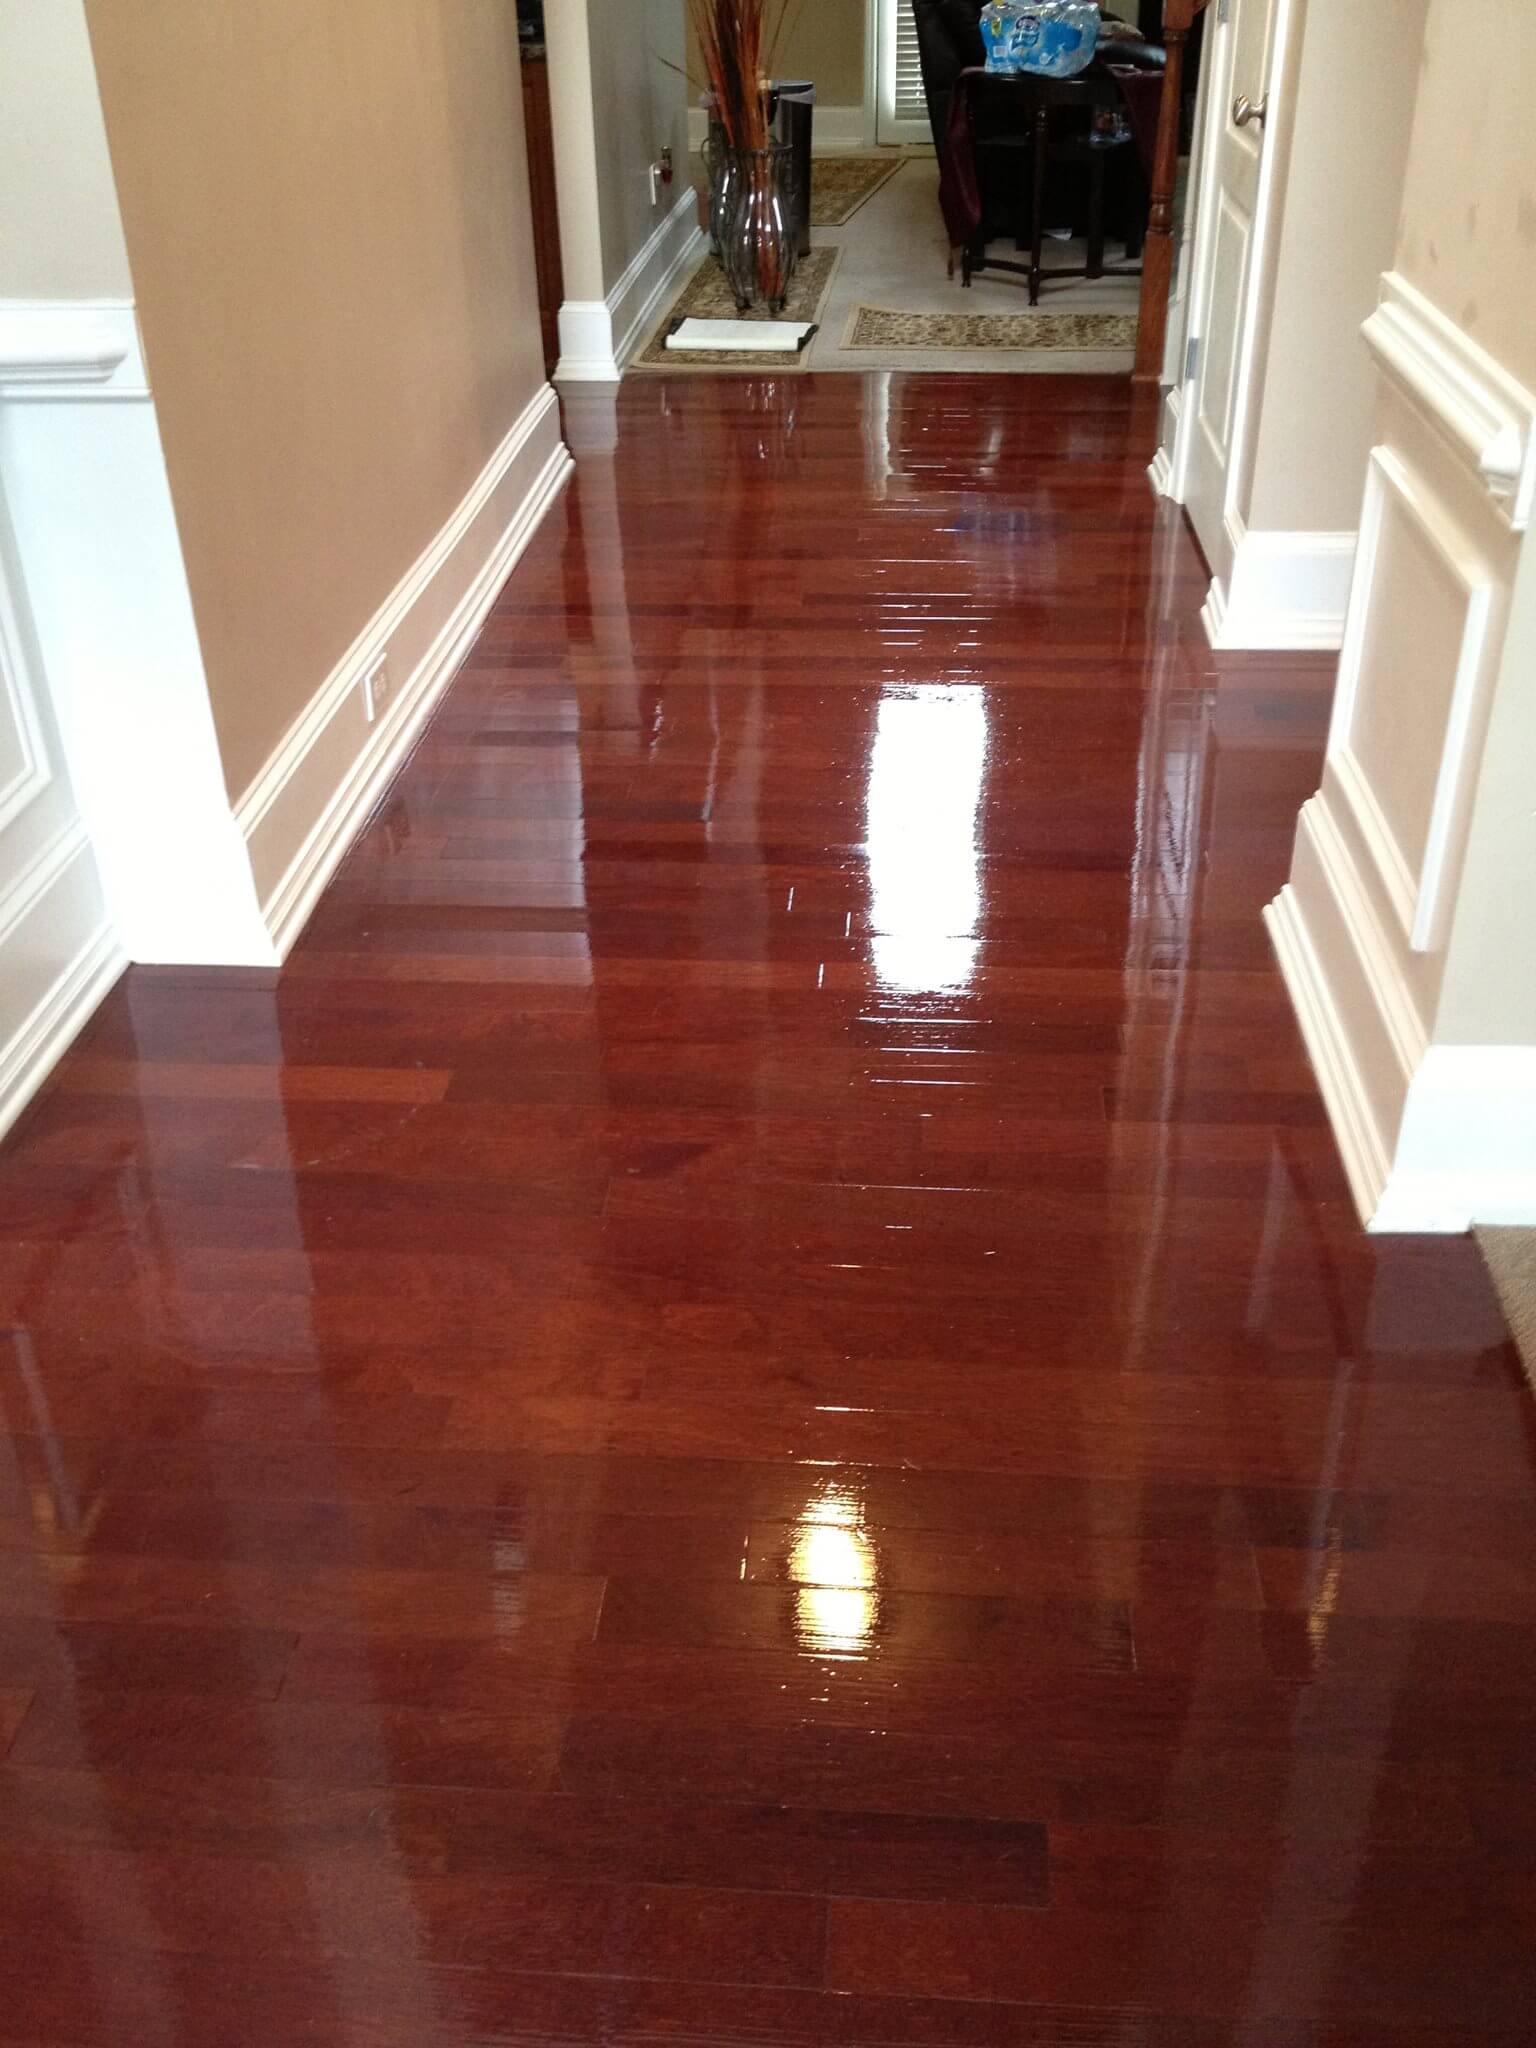 A refinished and shining hardwood floor